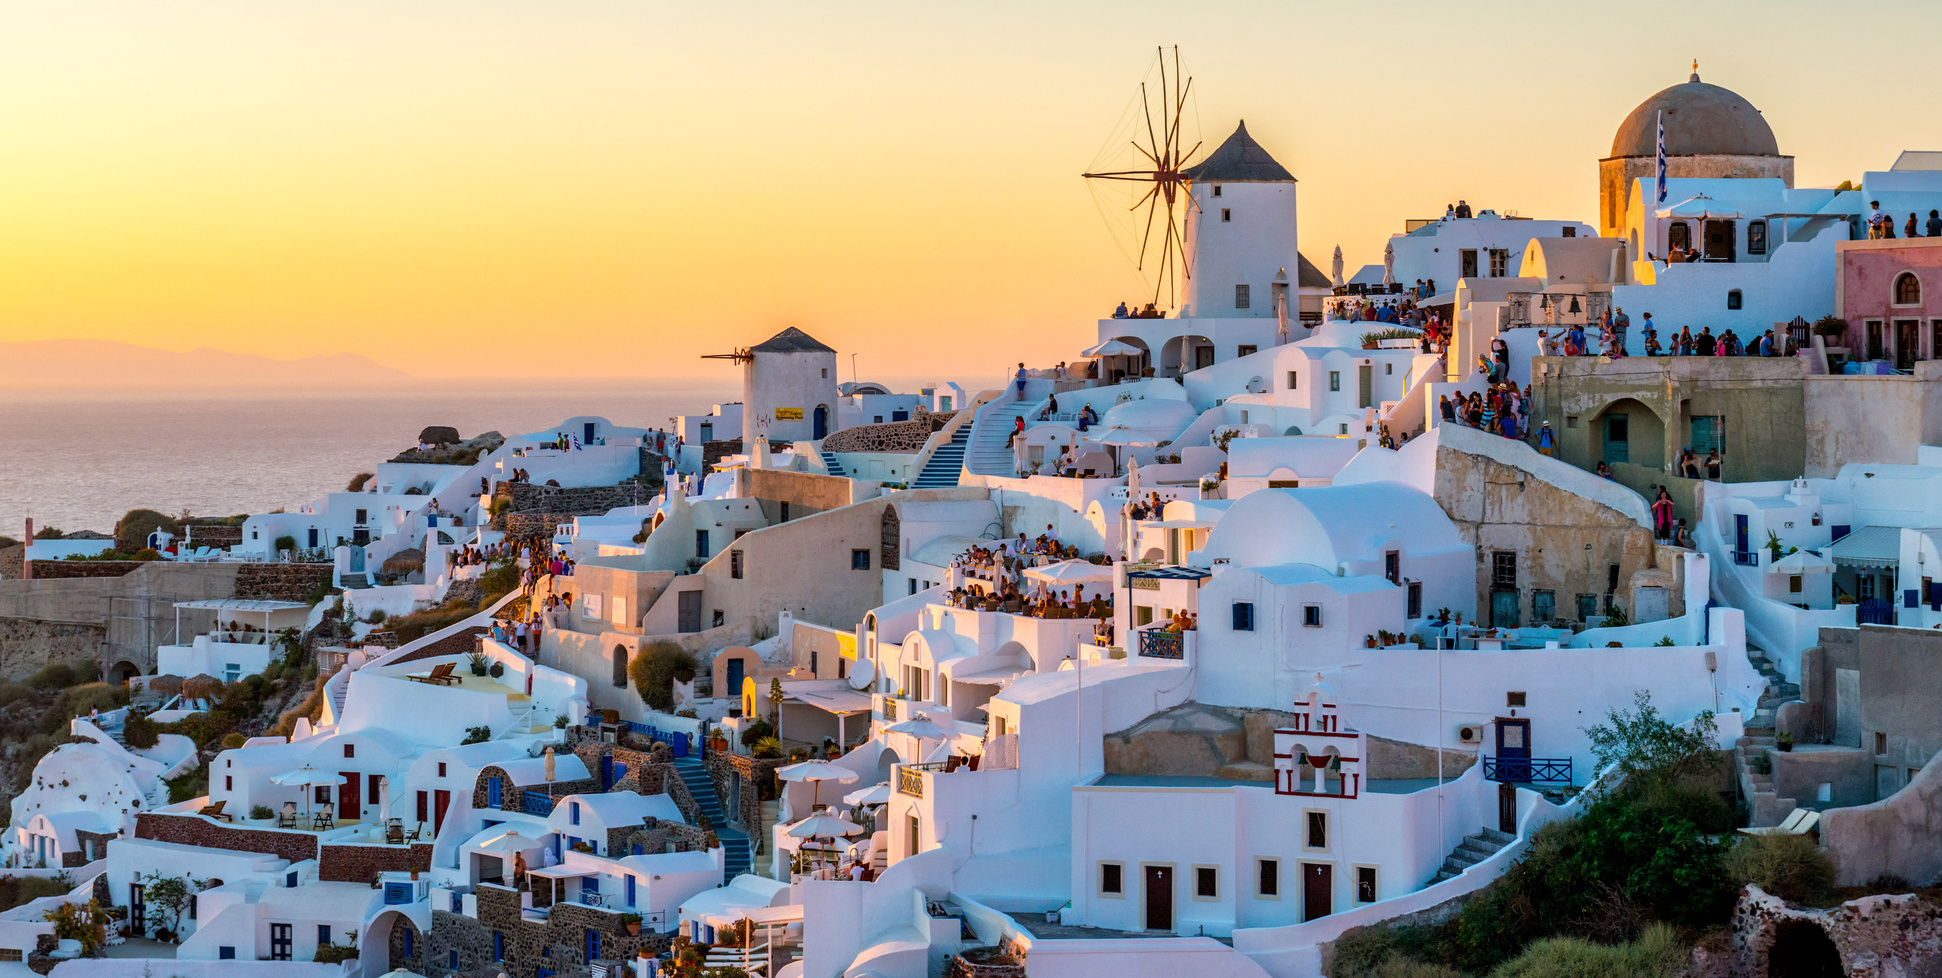 What to do and see in Santorini